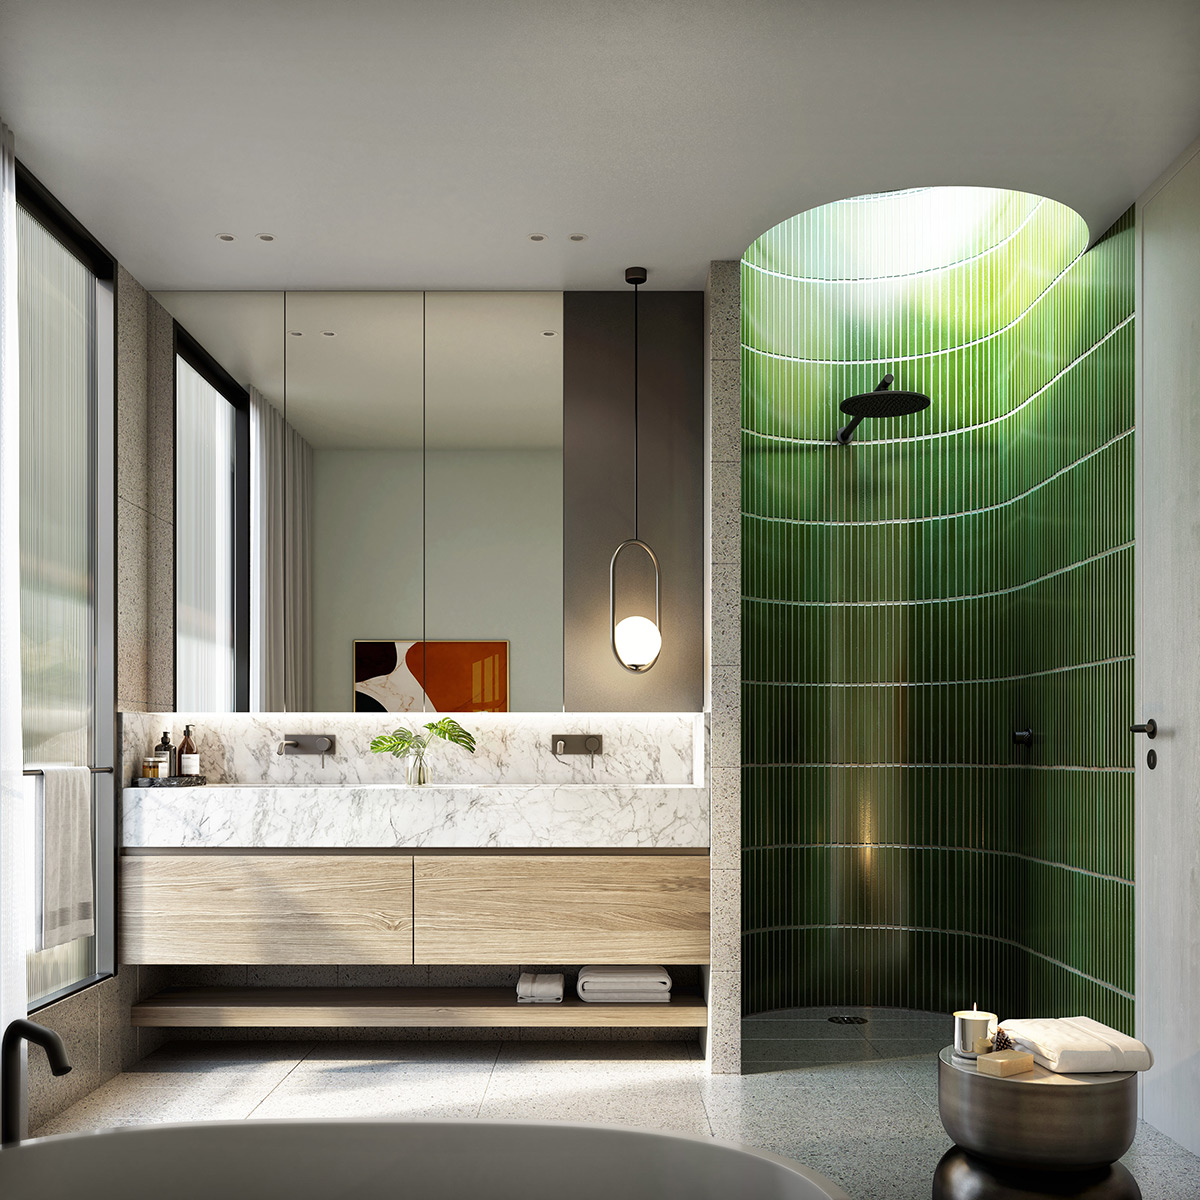 Green wall tiles define this wonderfully rounded shower space design from a predominantly neutral bathroom scheme.